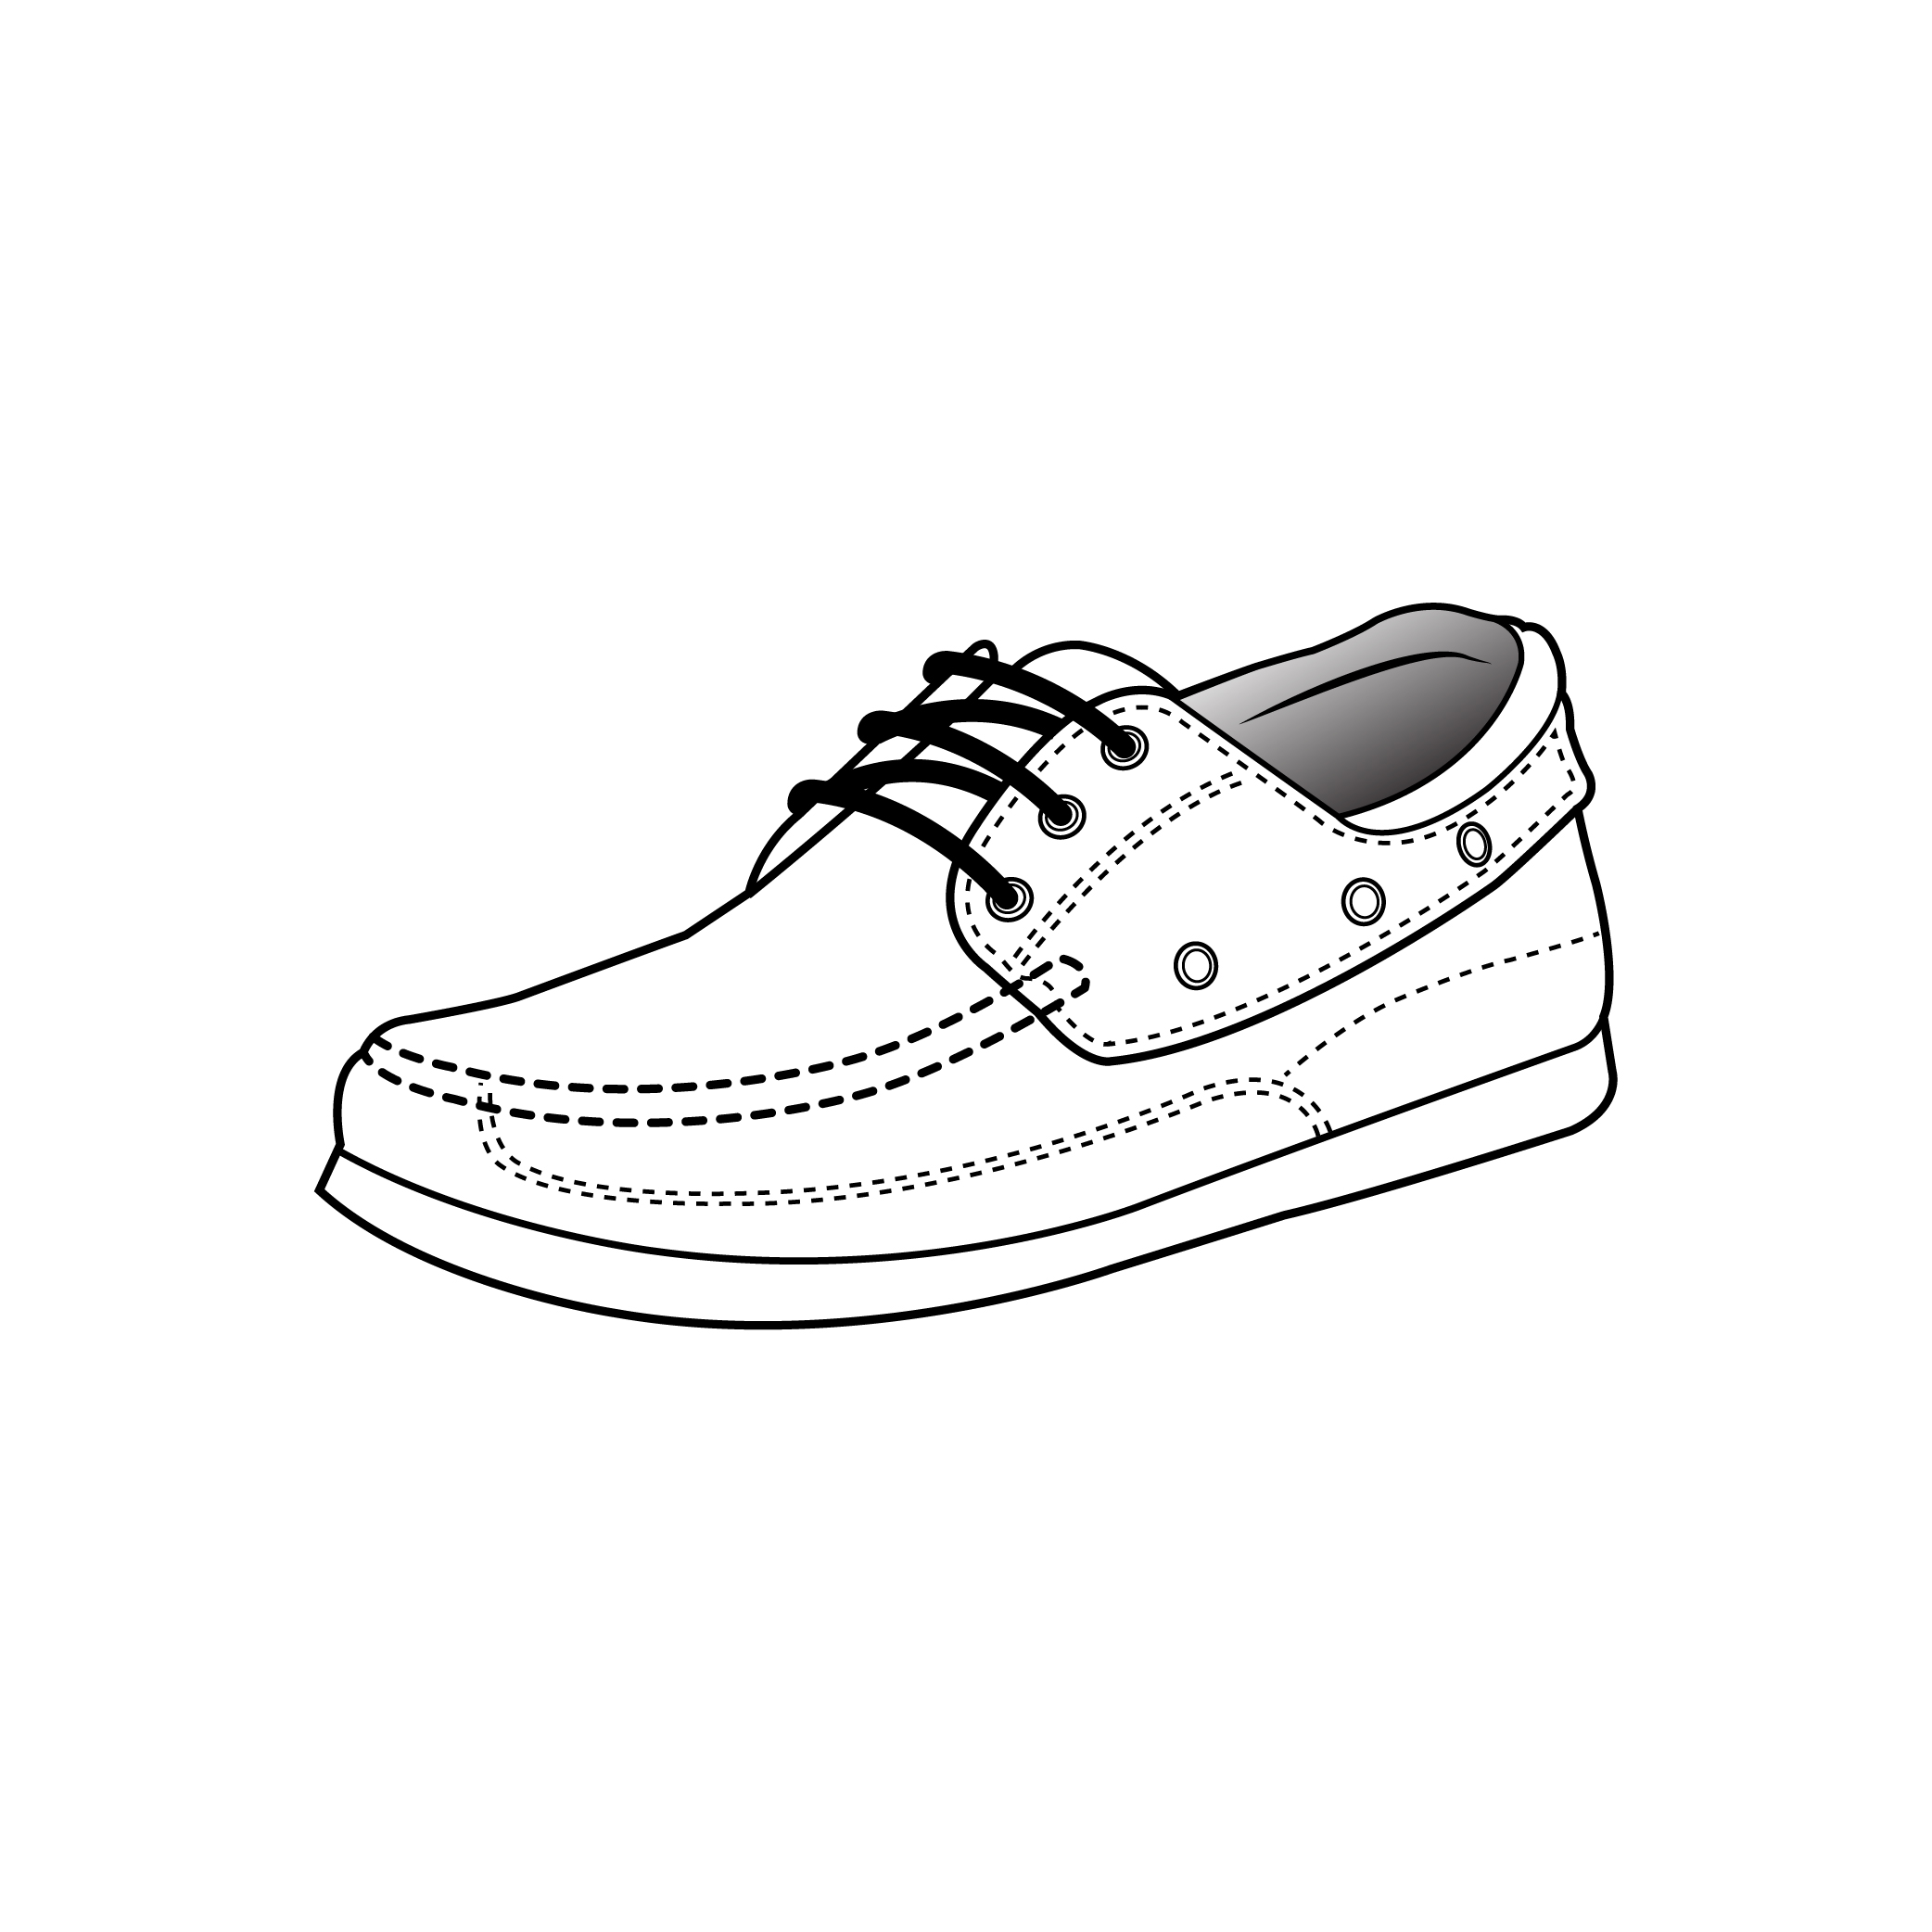 A vector drawing line illustration of a shoe for the Rivers brand